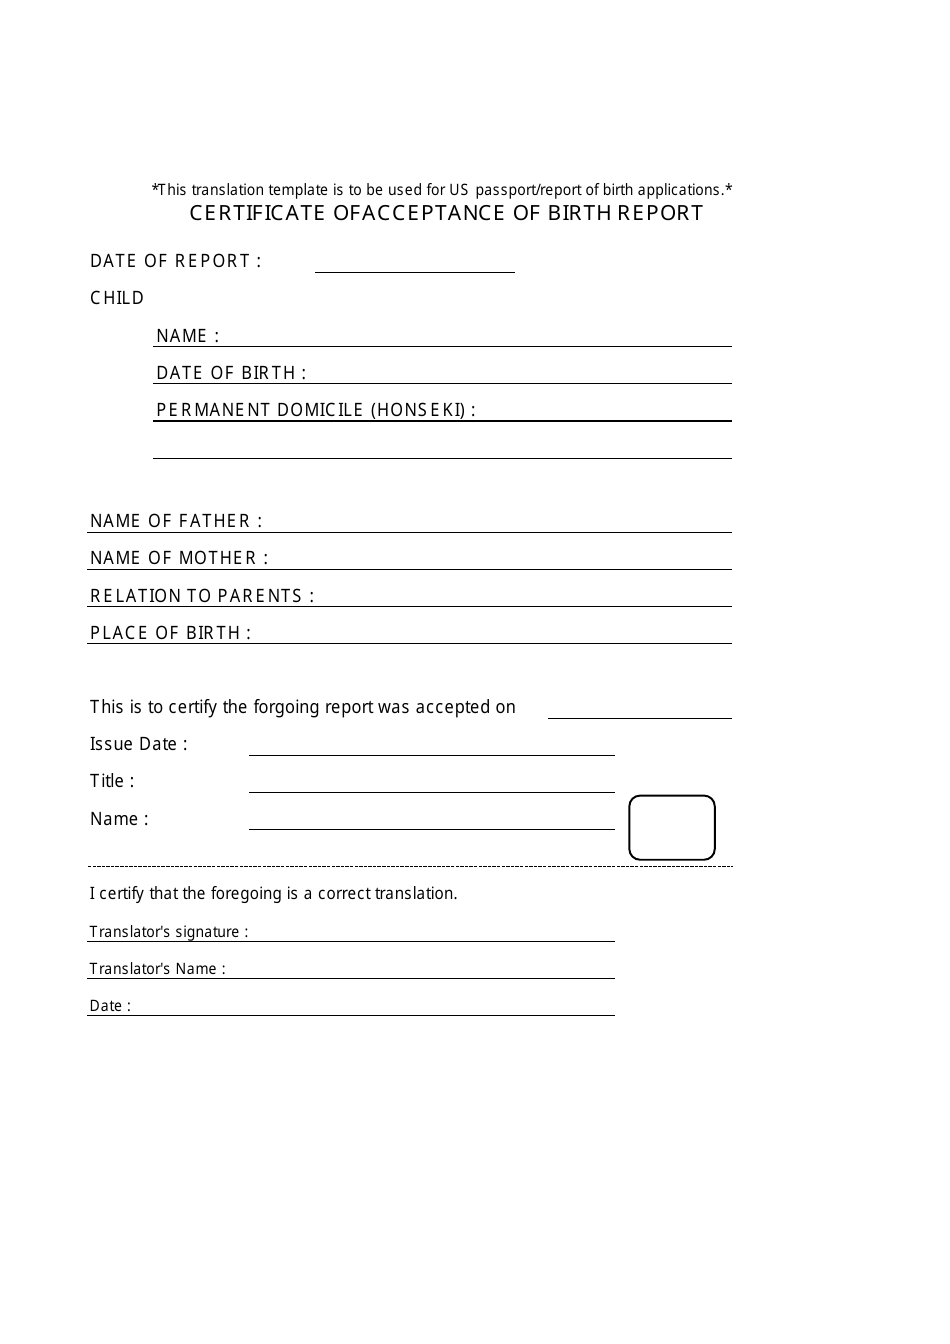 Certificate of Acceptance of Birth Report, Page 1